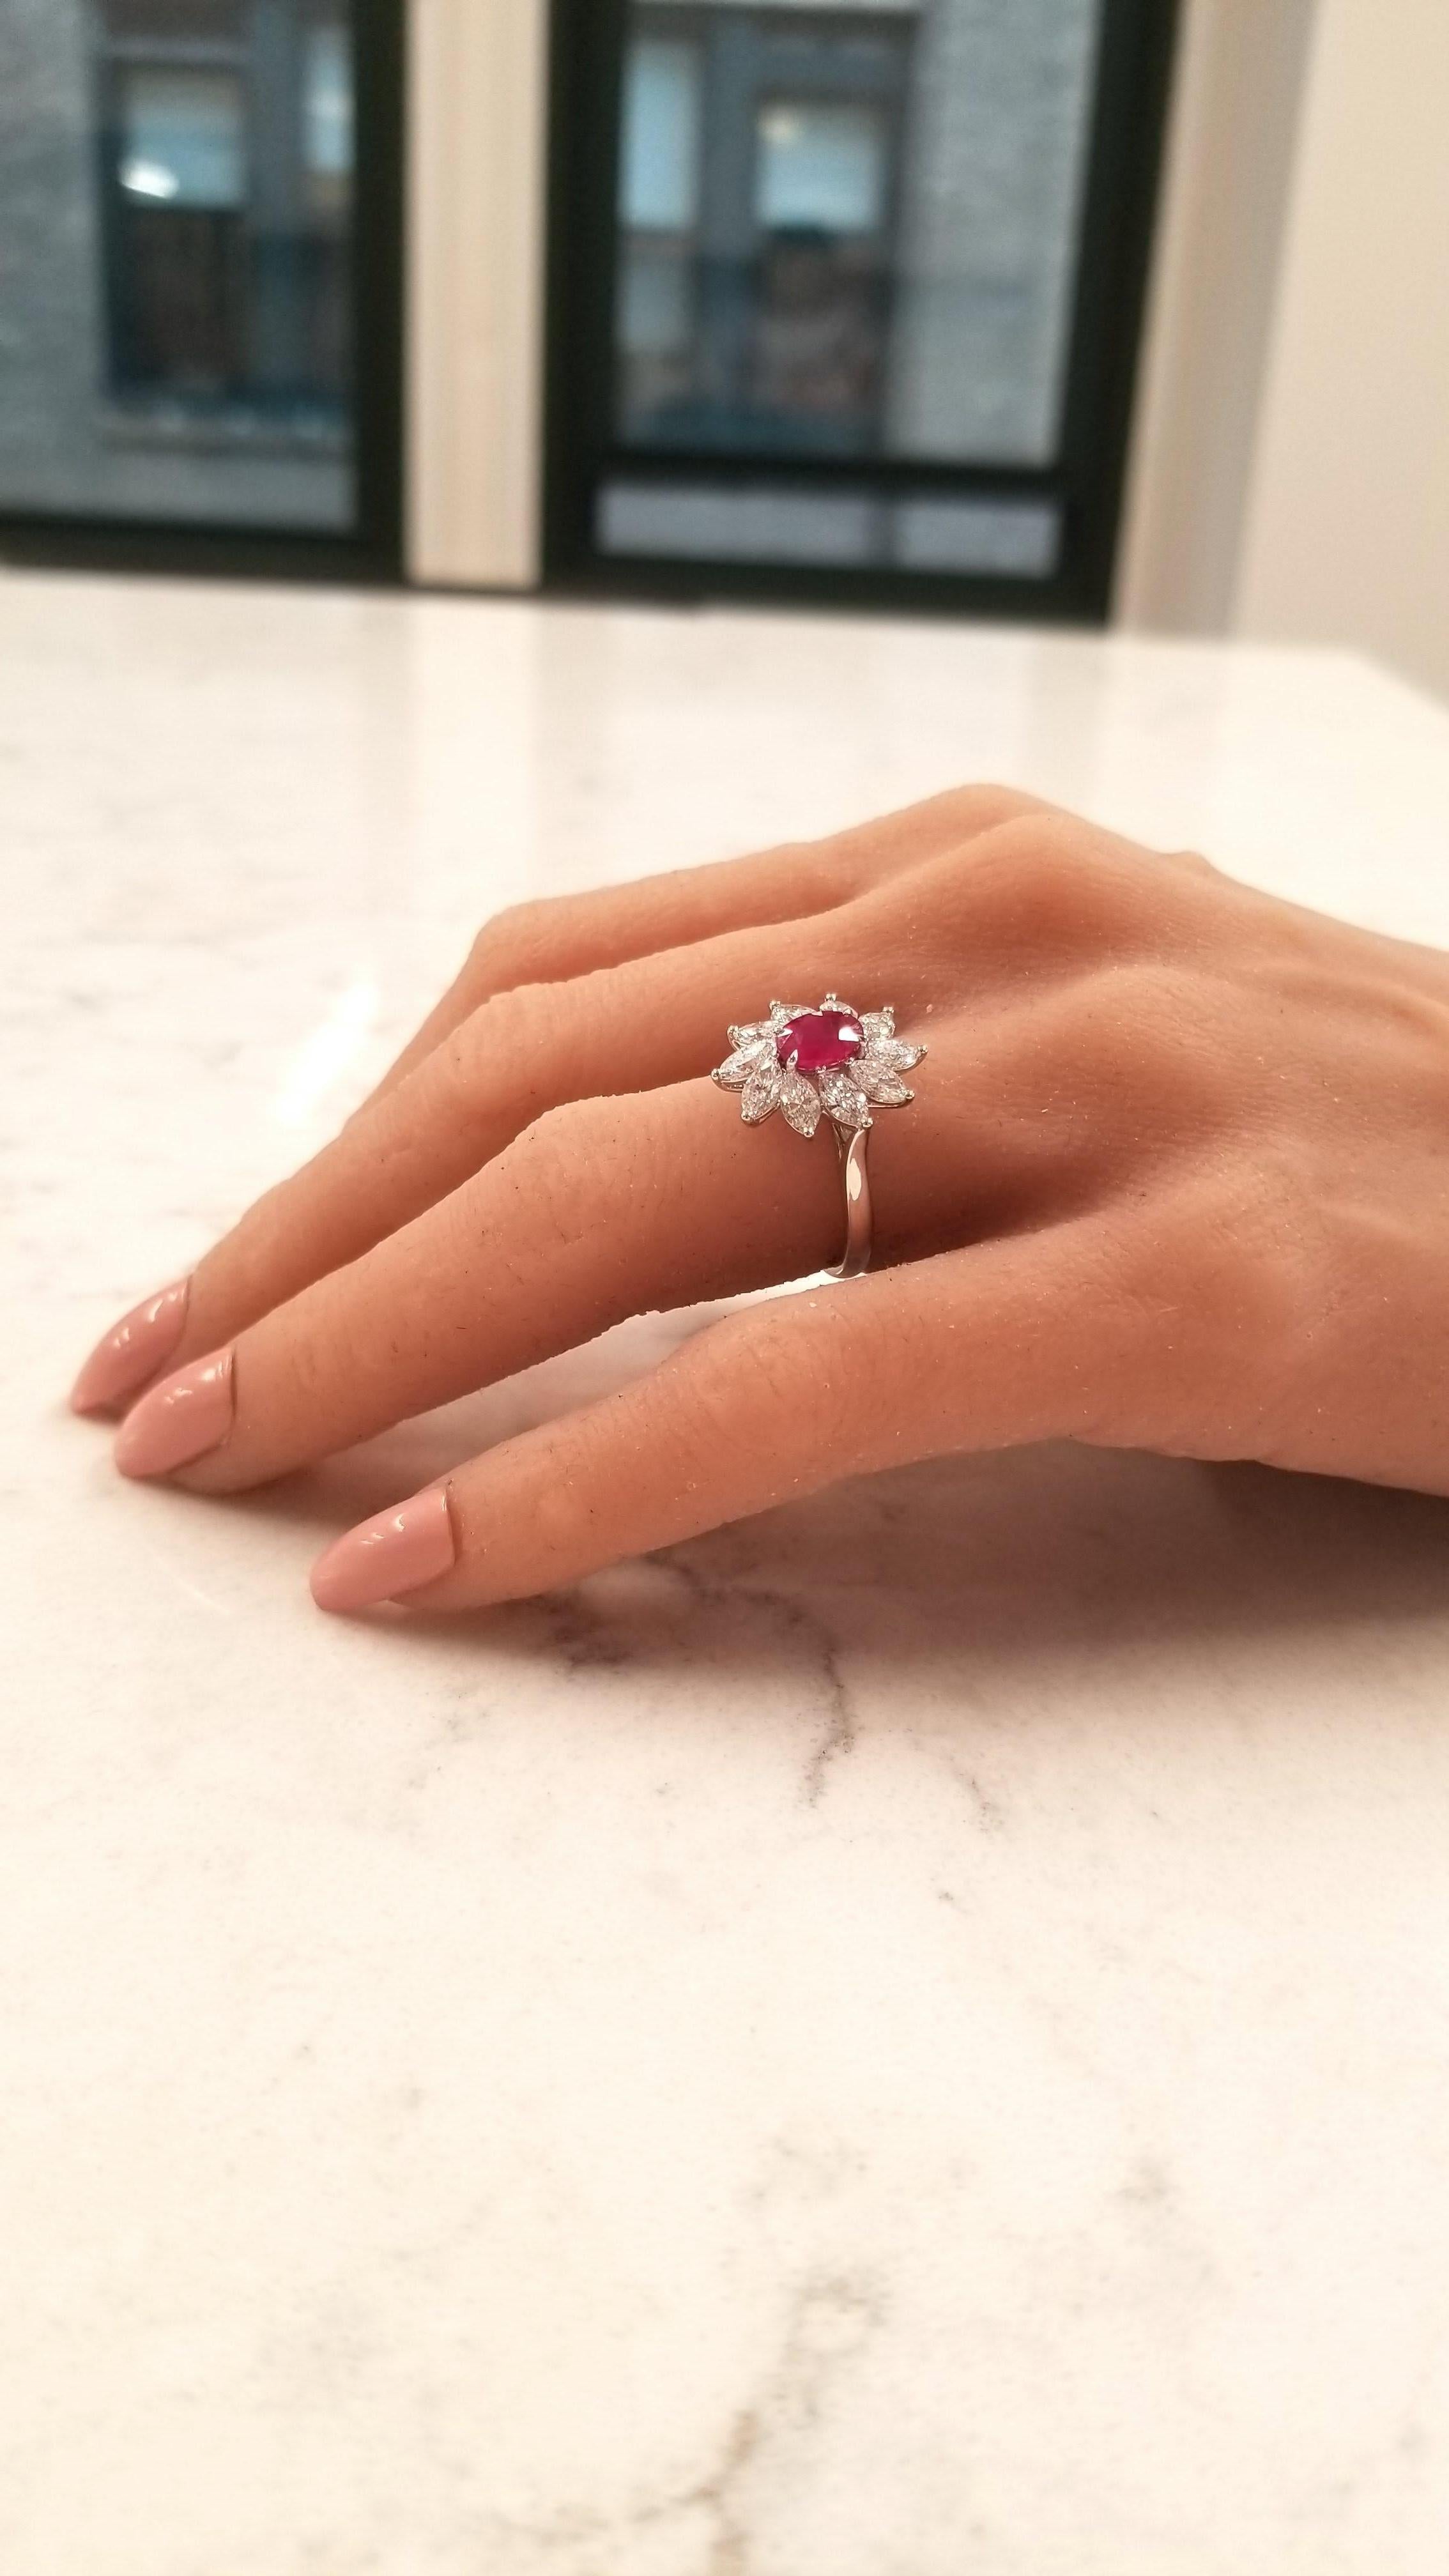 This is a cocktail ring featuring a 1.26 carat, oval brilliant, red ruby measuring 7.2x5.2mm. The gem source is Myanmar. Its color is blood red with no modifed colors. Its transparency and luster are superb. The vibrant red is complemented by a